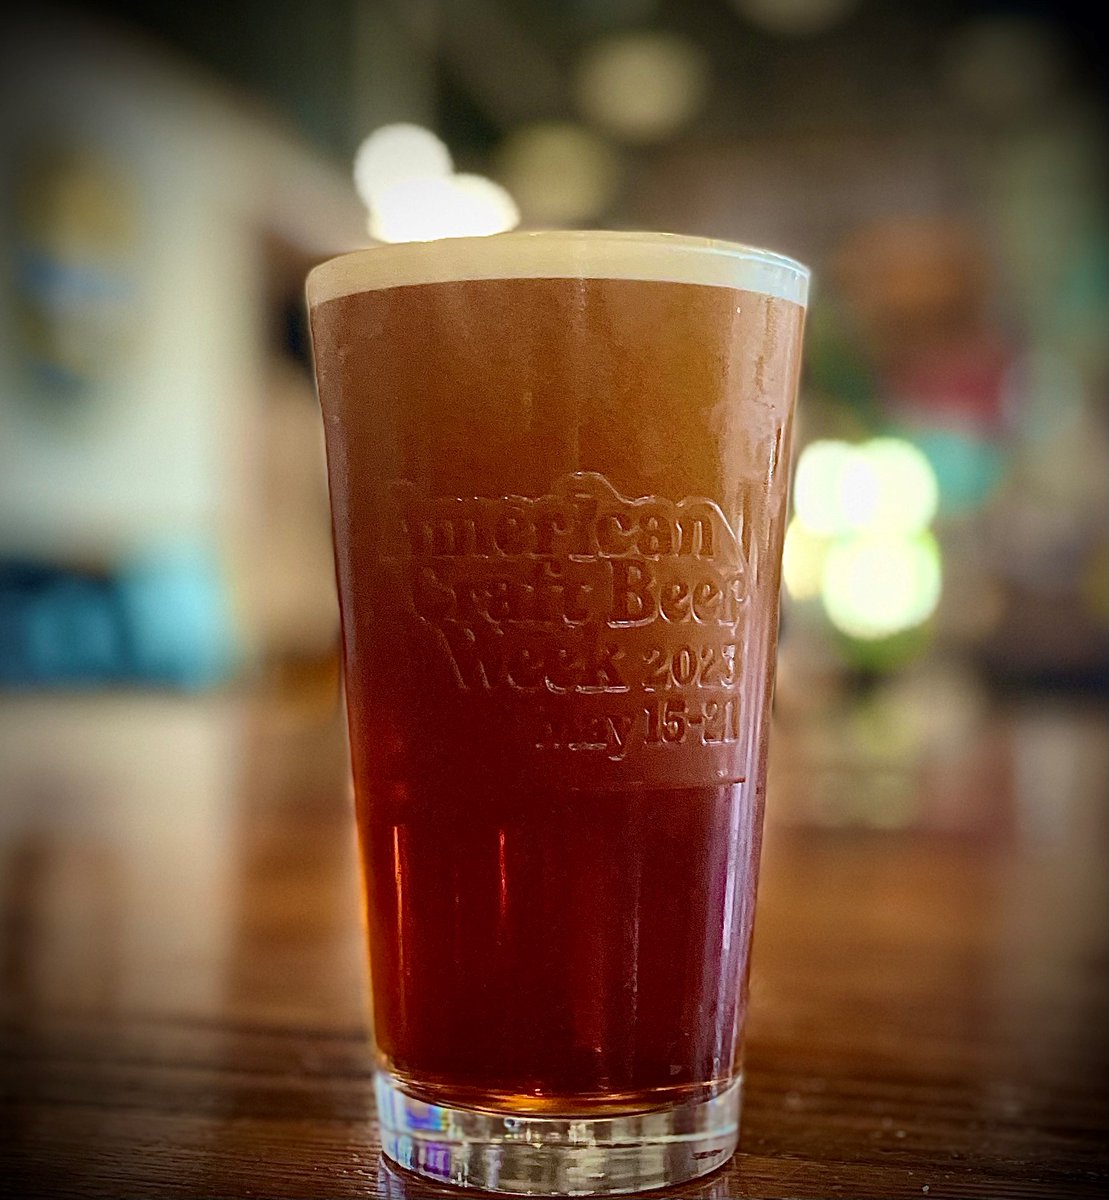 AMERICAN CRAFT BEER WEEK. 

We still have some Axum Coffee & Vanilla Nitro Brown Ale.

Tomorrow we will release 'Go Go Juice' Mango & Ghost Pepper Pale Ale.

Commemorative glasses are $5 for purchasing any of our Craft Beer Week releases. 

#getcrooked #americancraftbeerweek